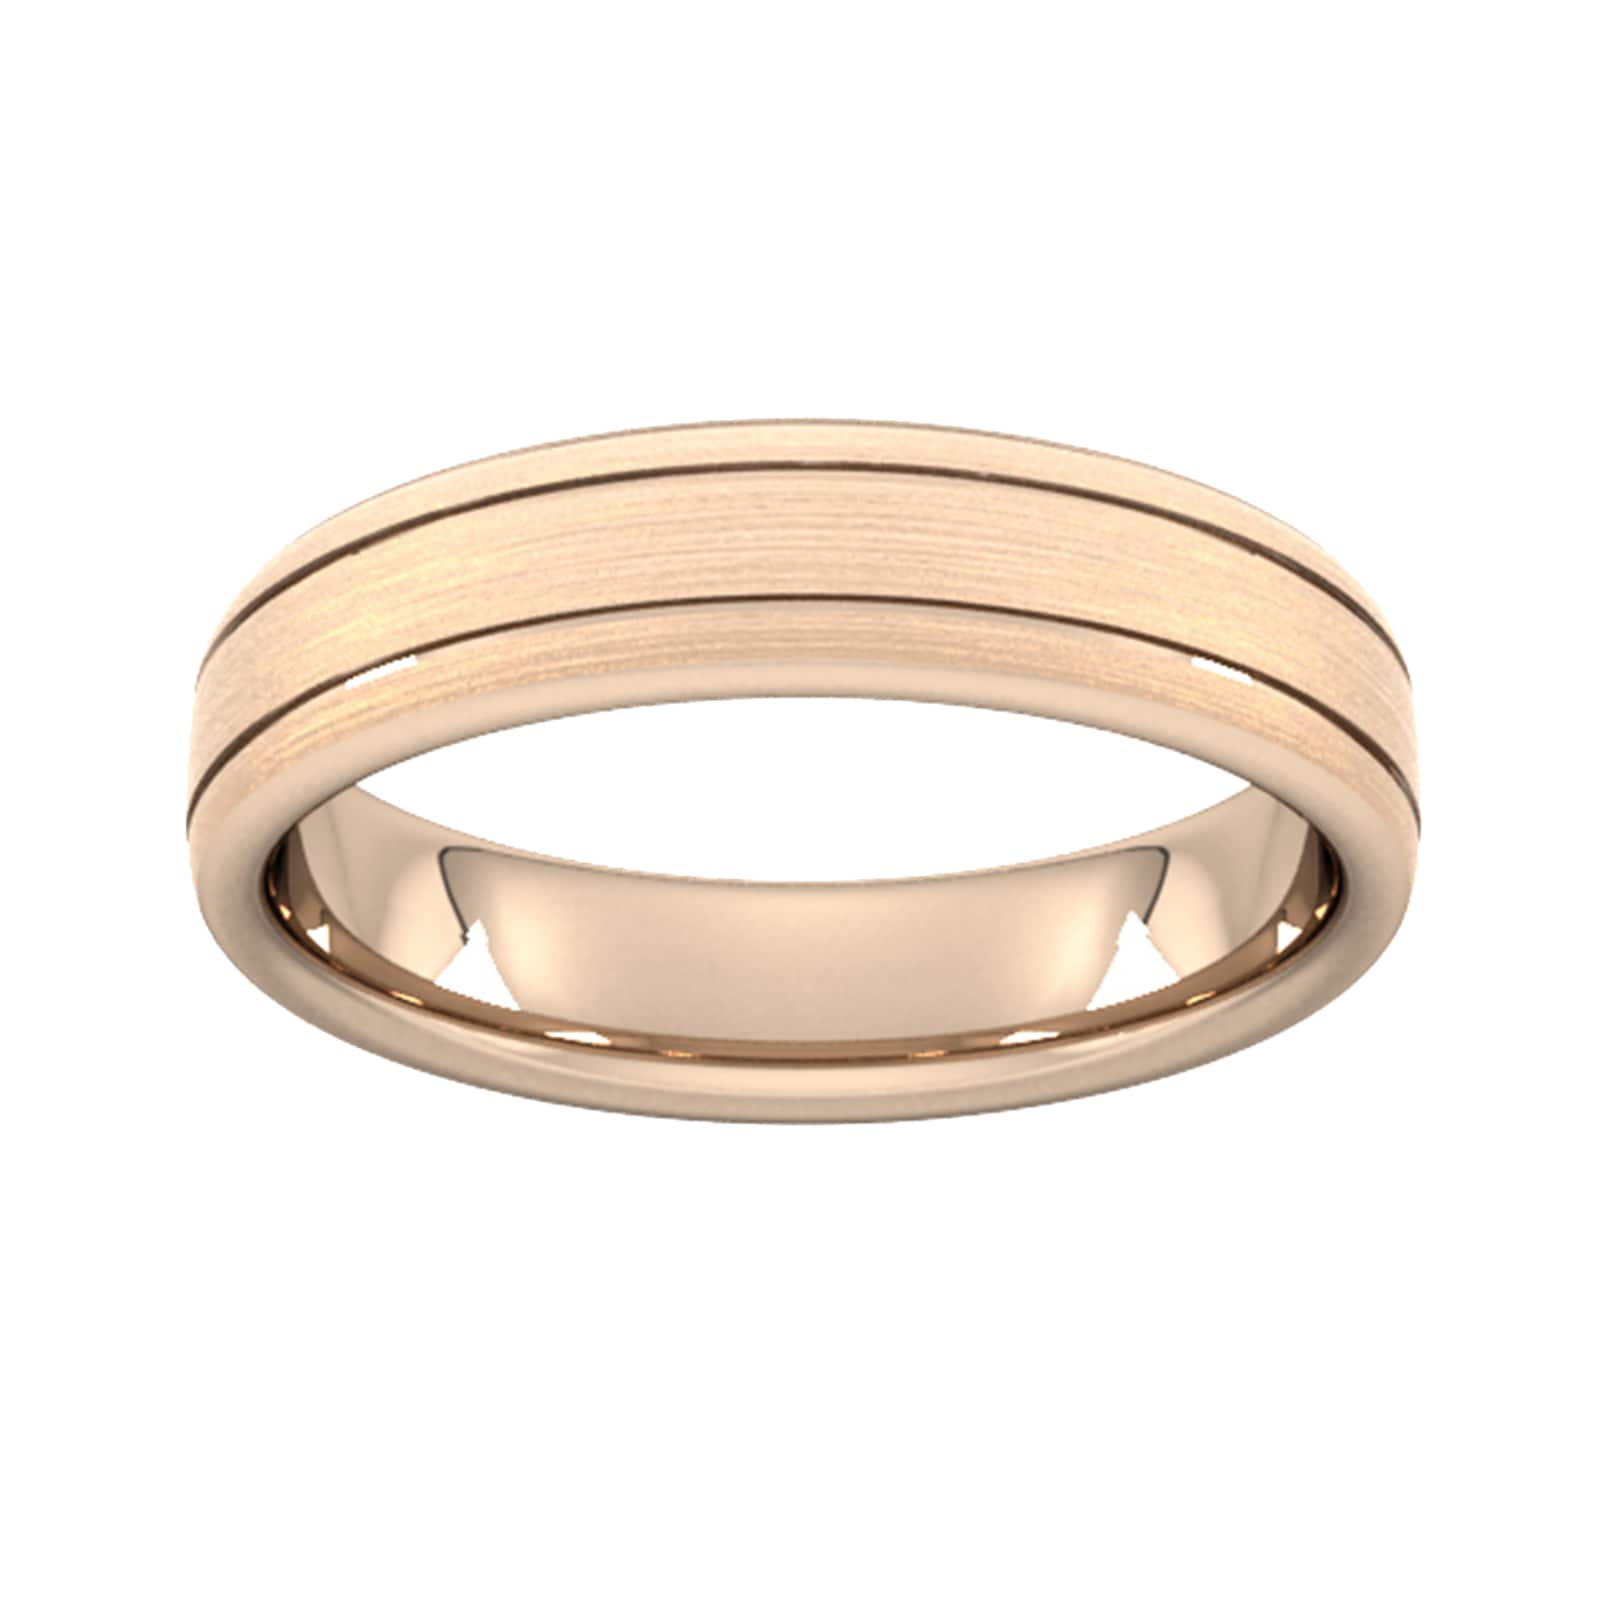 5mm Slight Court Extra Heavy Matt Finish With Double Grooves Wedding Ring In 18 Carat Rose Gold - Ring Size L